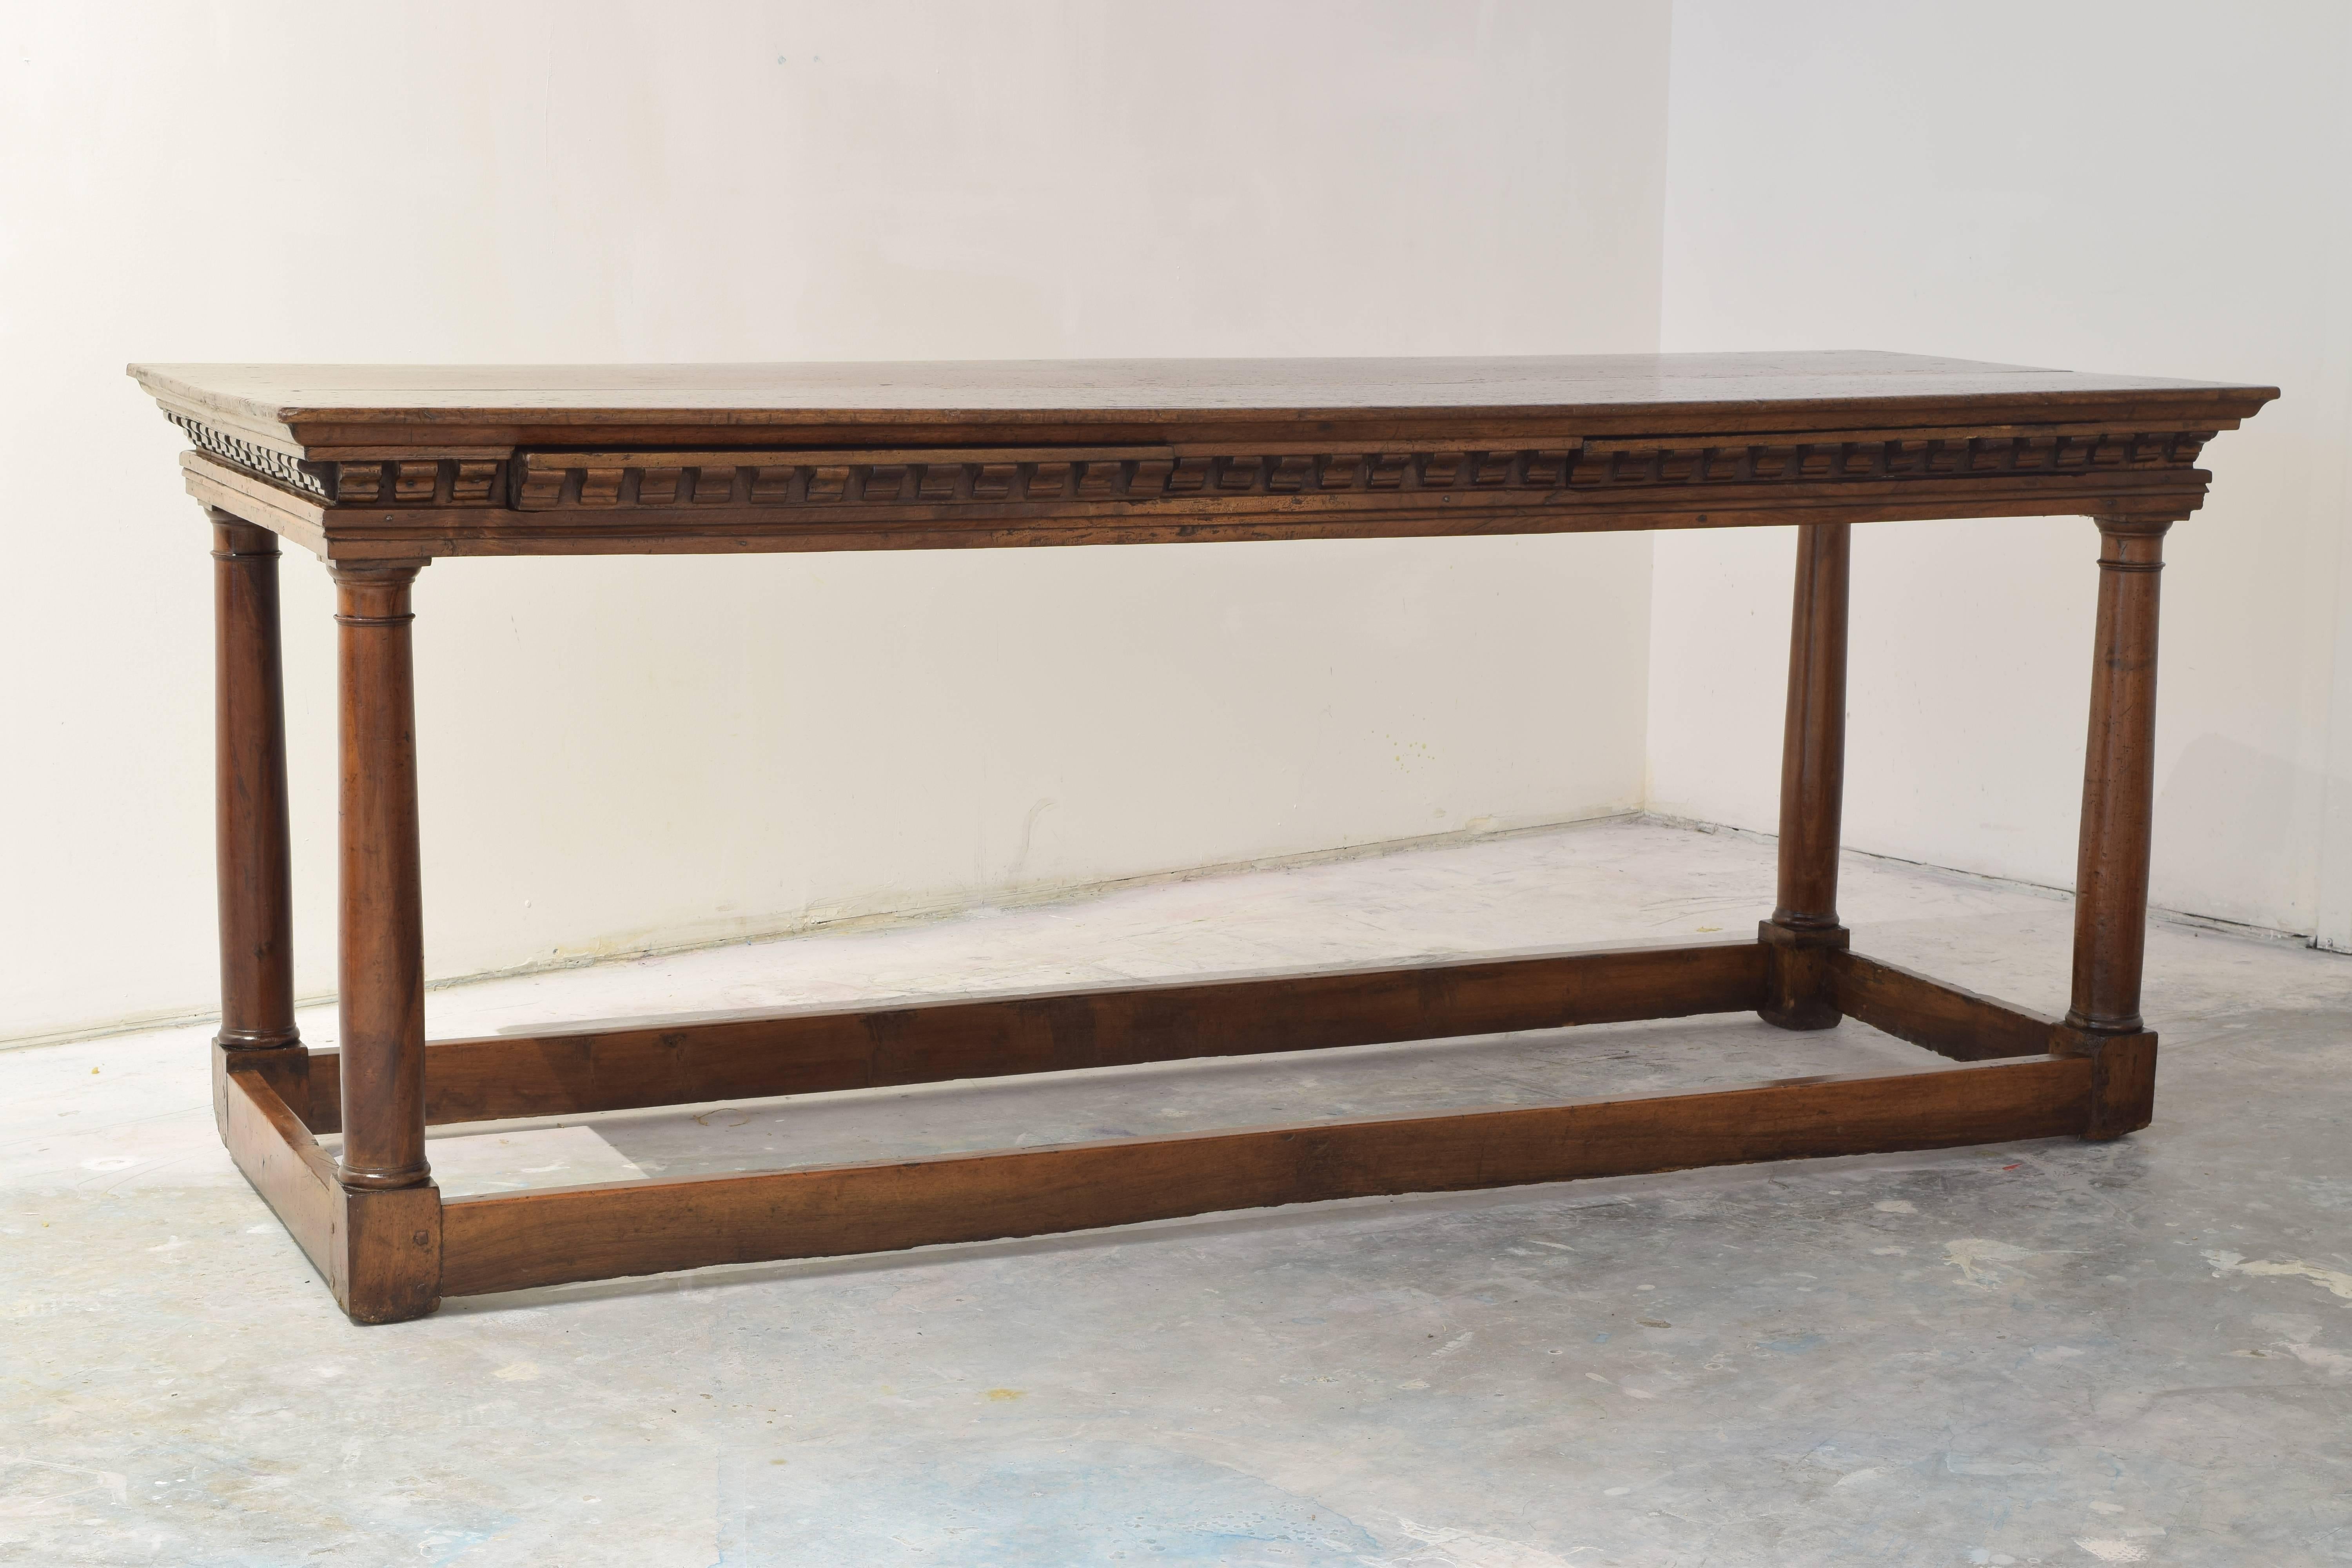 Two hidden drawers carved within the dentile molding apron and full box stretcher connected by four turned column legs.